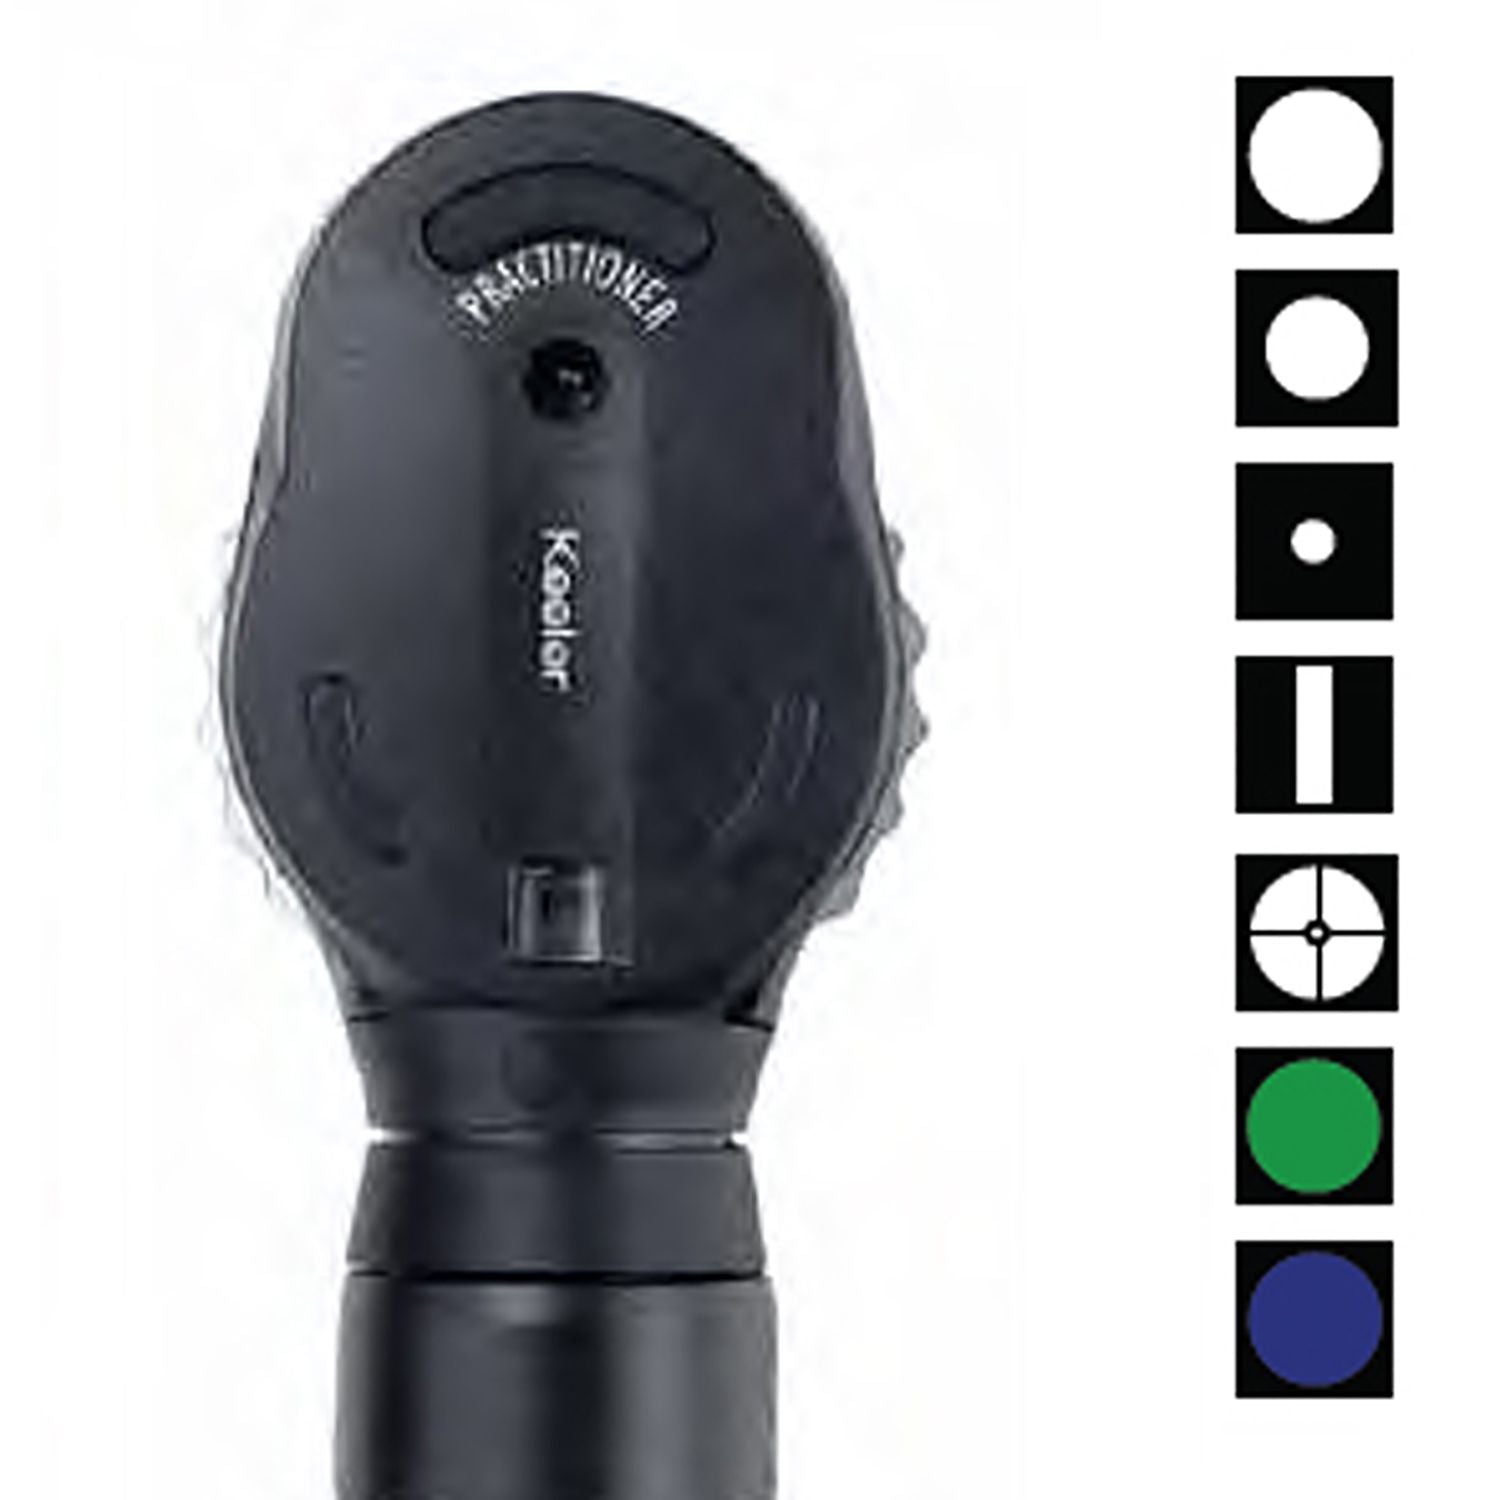 New Keeler Practioner Ophthalmoscope | 2.8v Head & Bulb Only In Carton